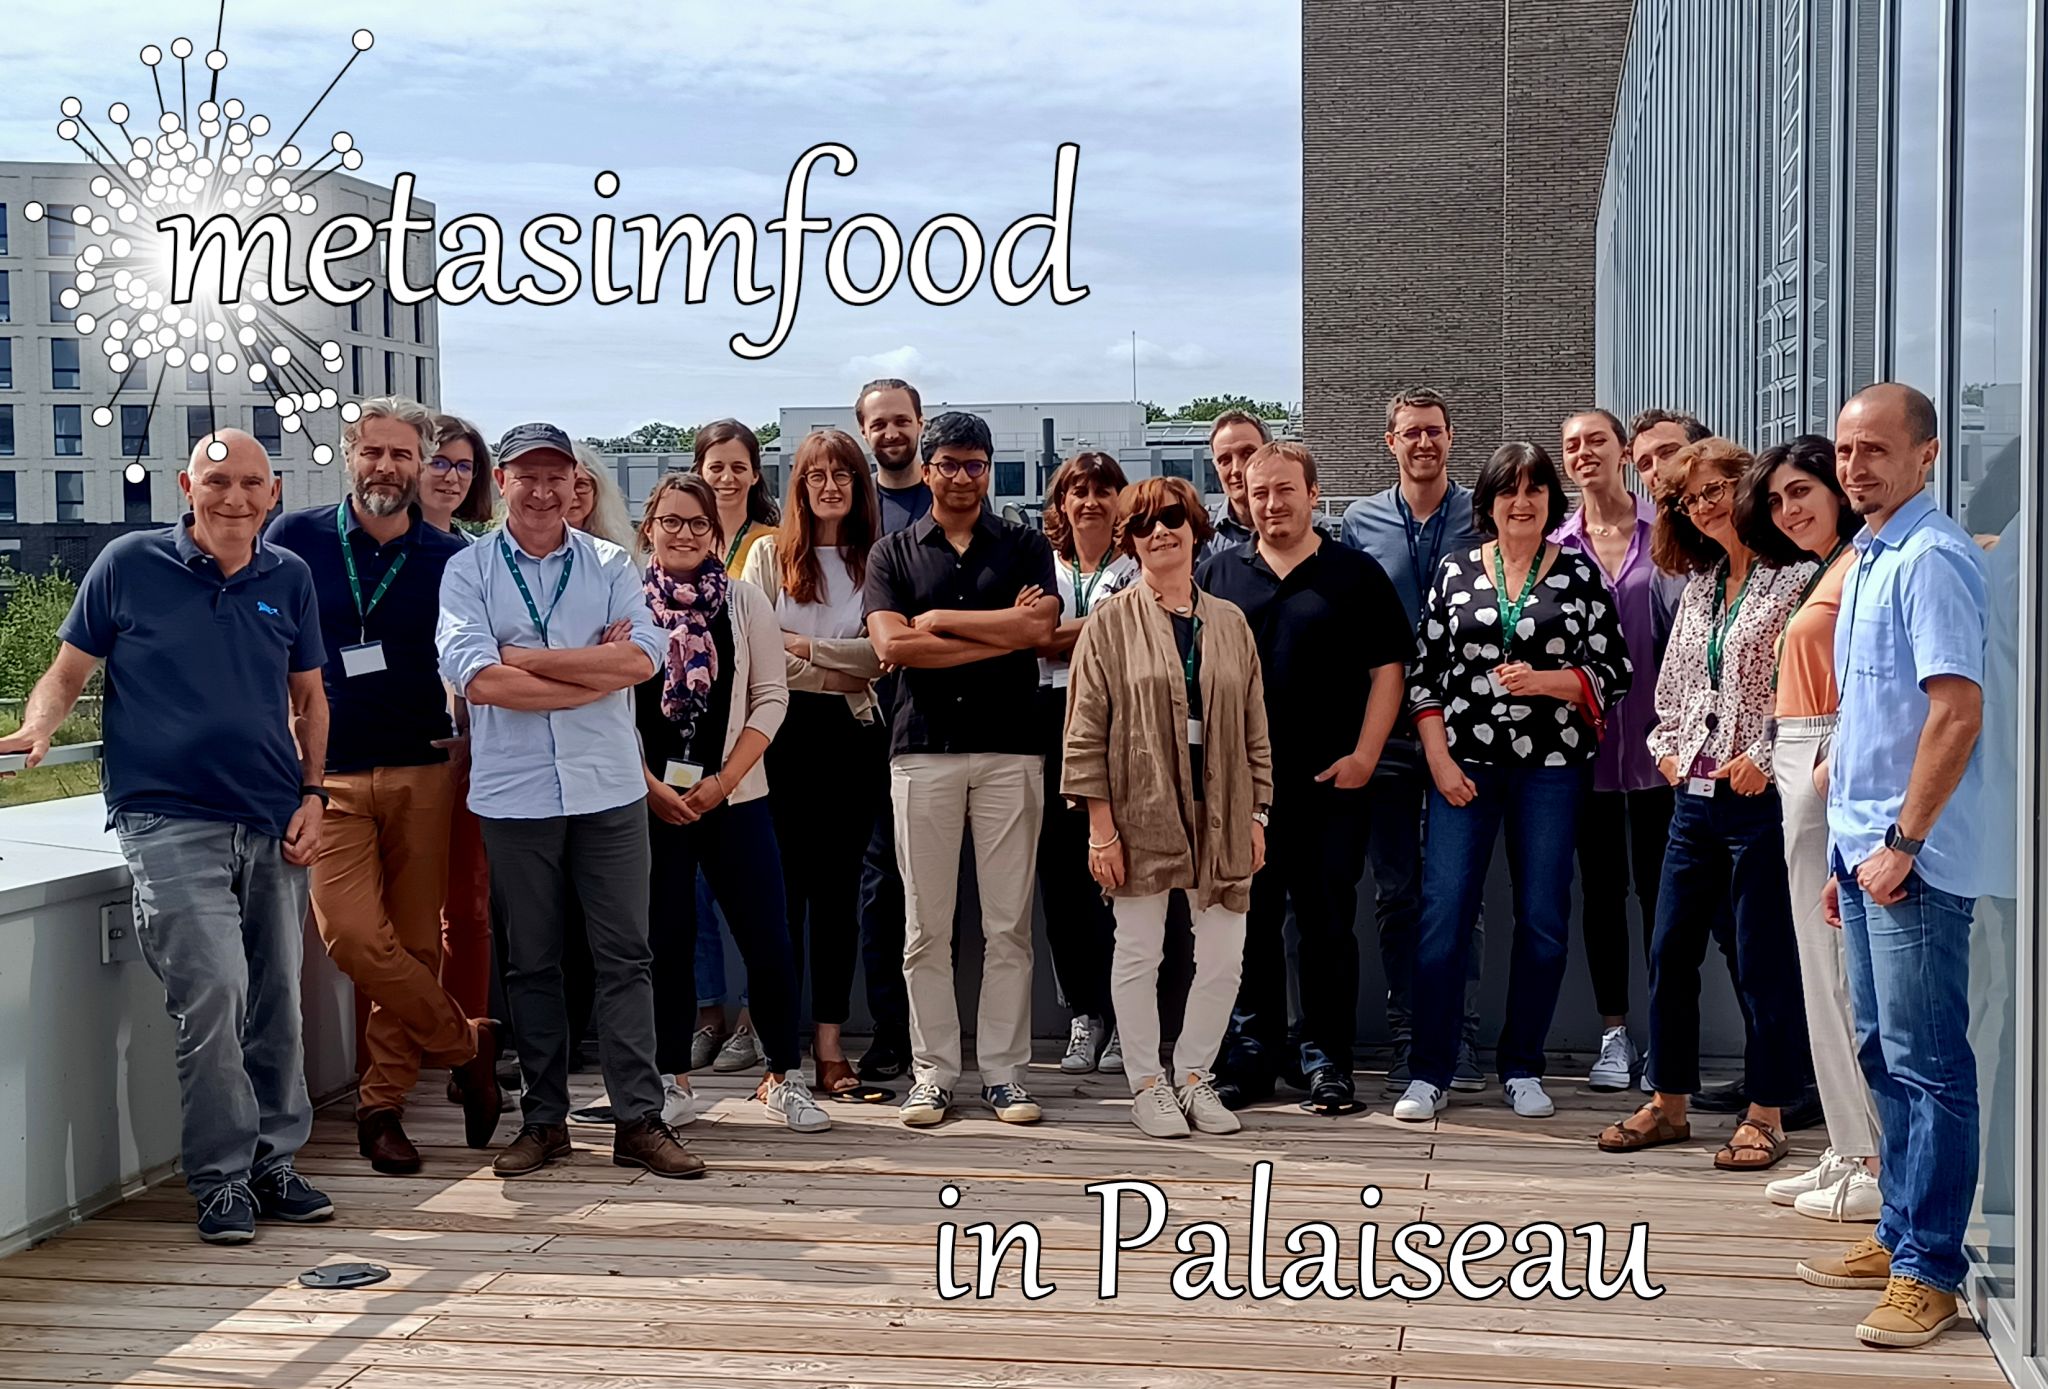 Third scientific meeting of ANR metasimfood project in Palaiseau